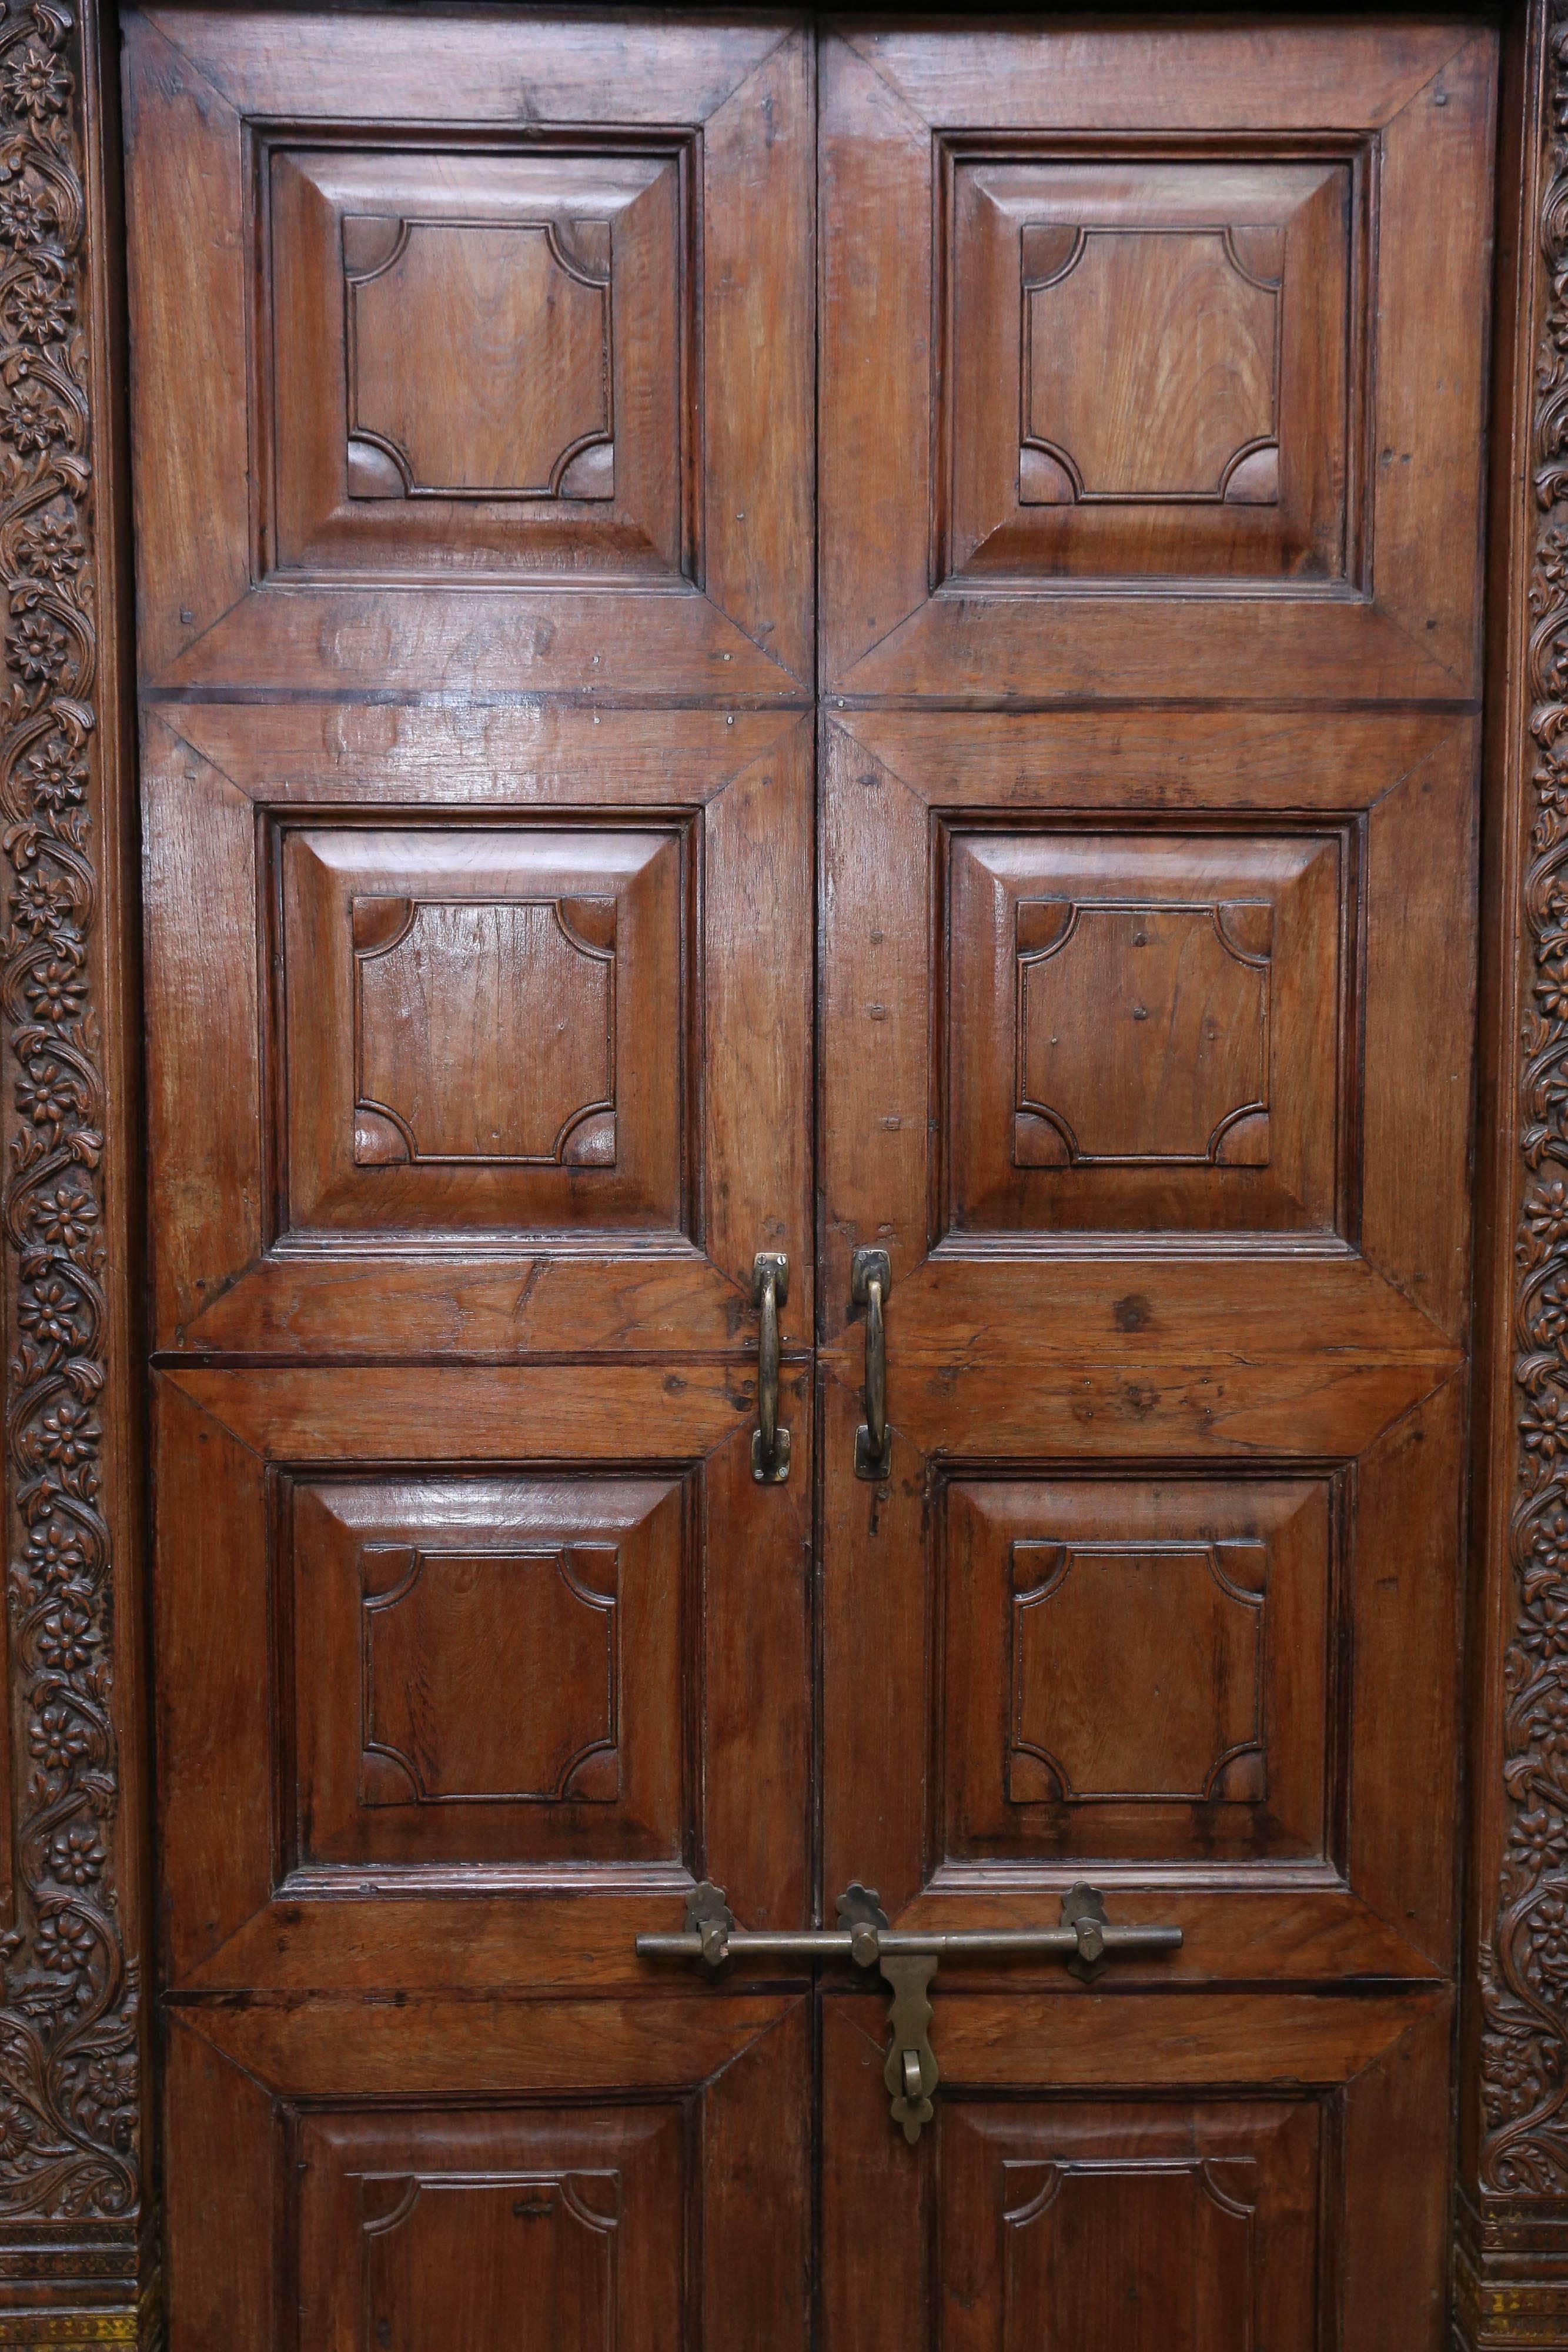 This door represents the fusion of Indian style with European tradition in architecture. With restrained but precise carvings, geometrical patterns combined with superb craftsmanship demonstrate the best of the British colonial work at the peak of